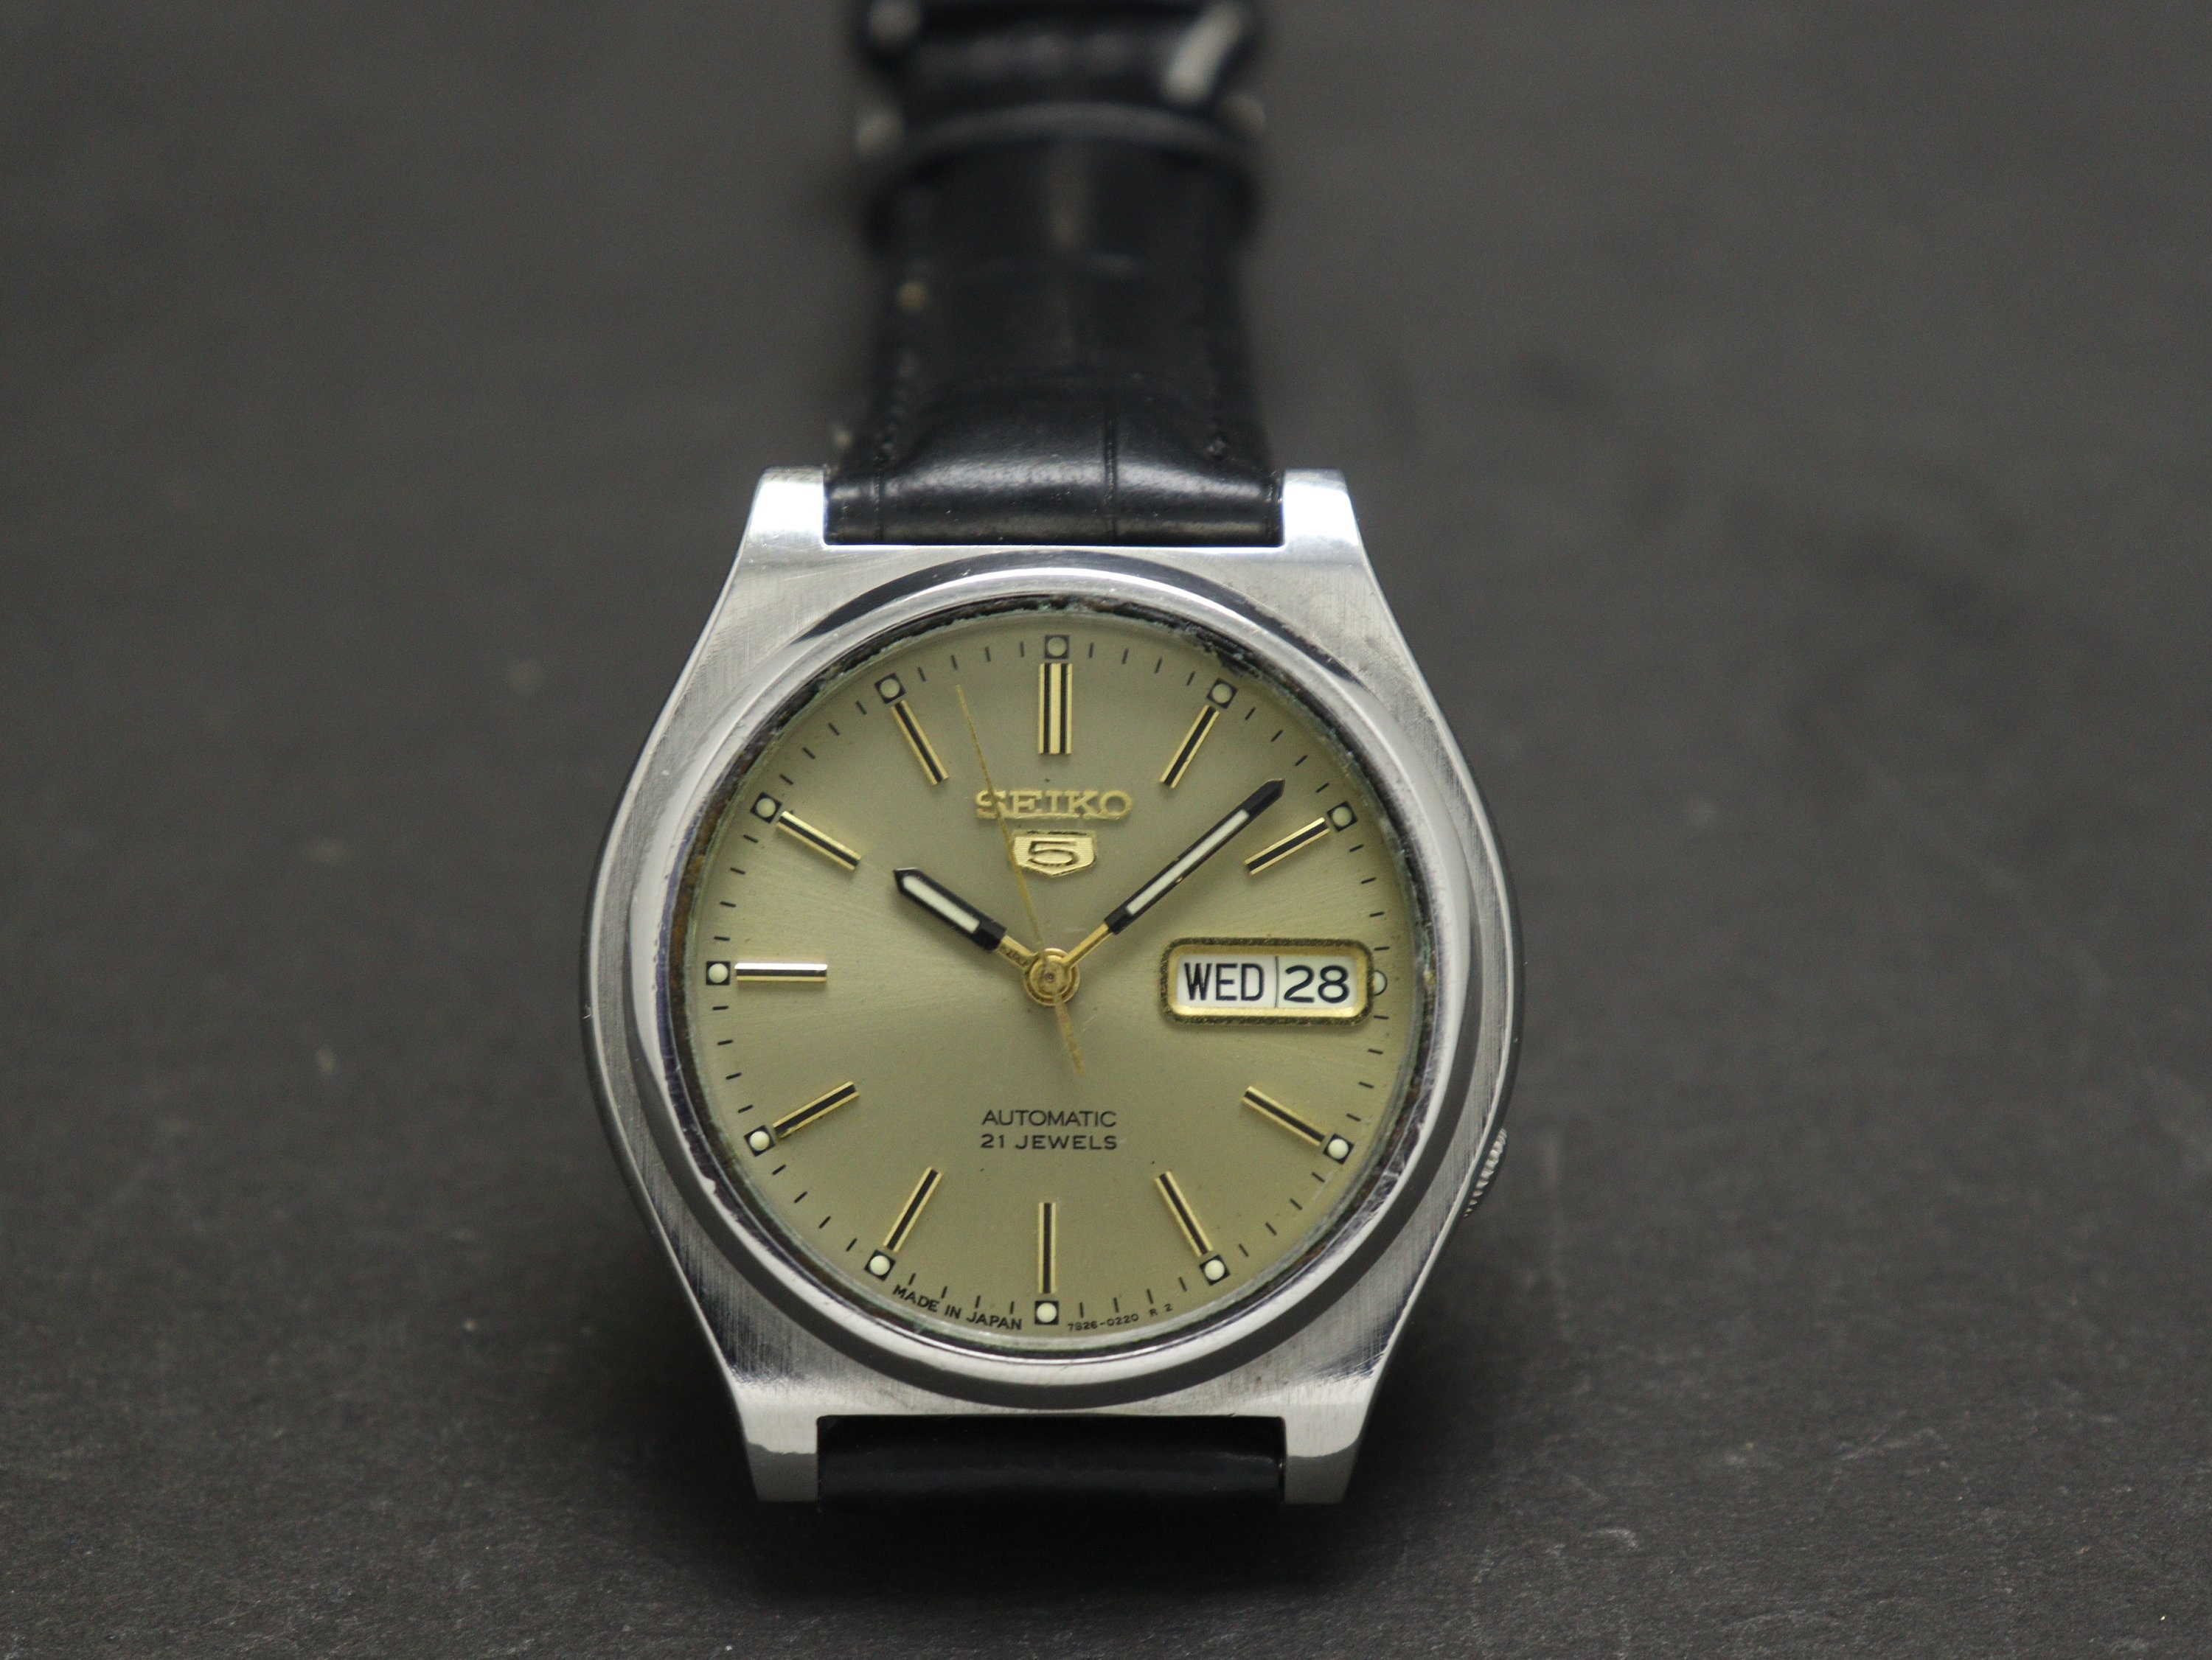 Vintage Seiko 5 Automatic Ref. No. 7s26-3170 Japan Made - Etsy UK